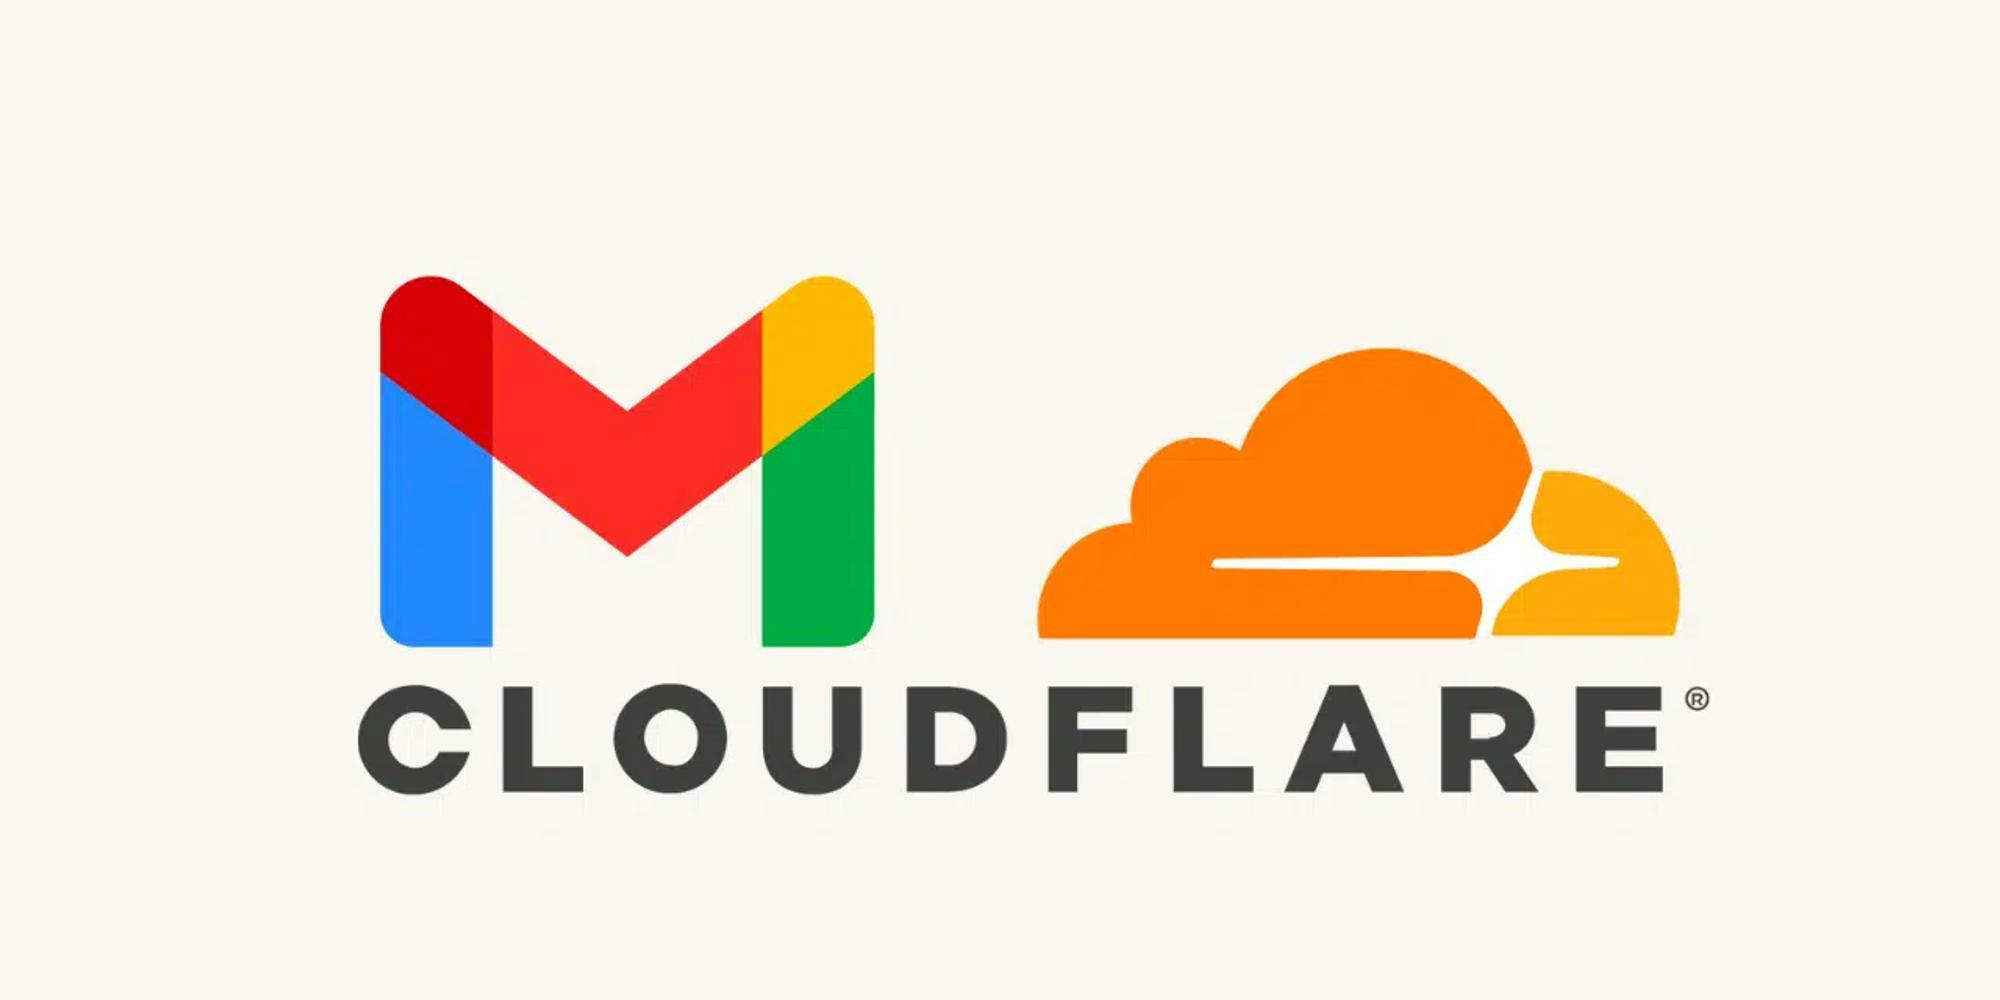 How to get personal domain email for free in G-Mail with a Cloudflare integration.